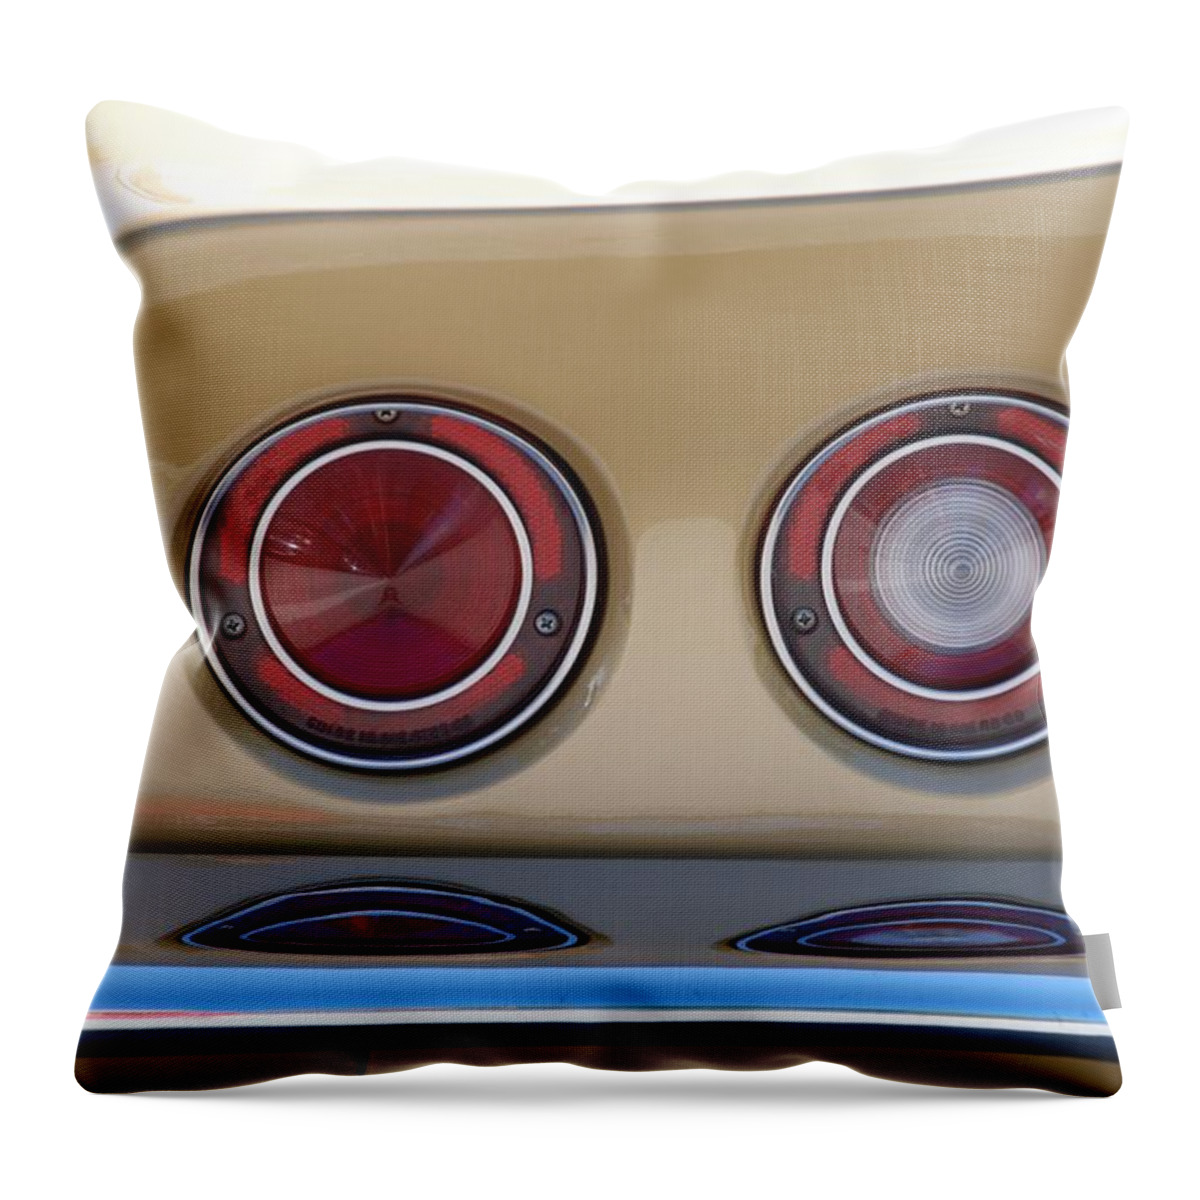 Corvette Throw Pillow featuring the photograph Vette Lights by Rob Hans